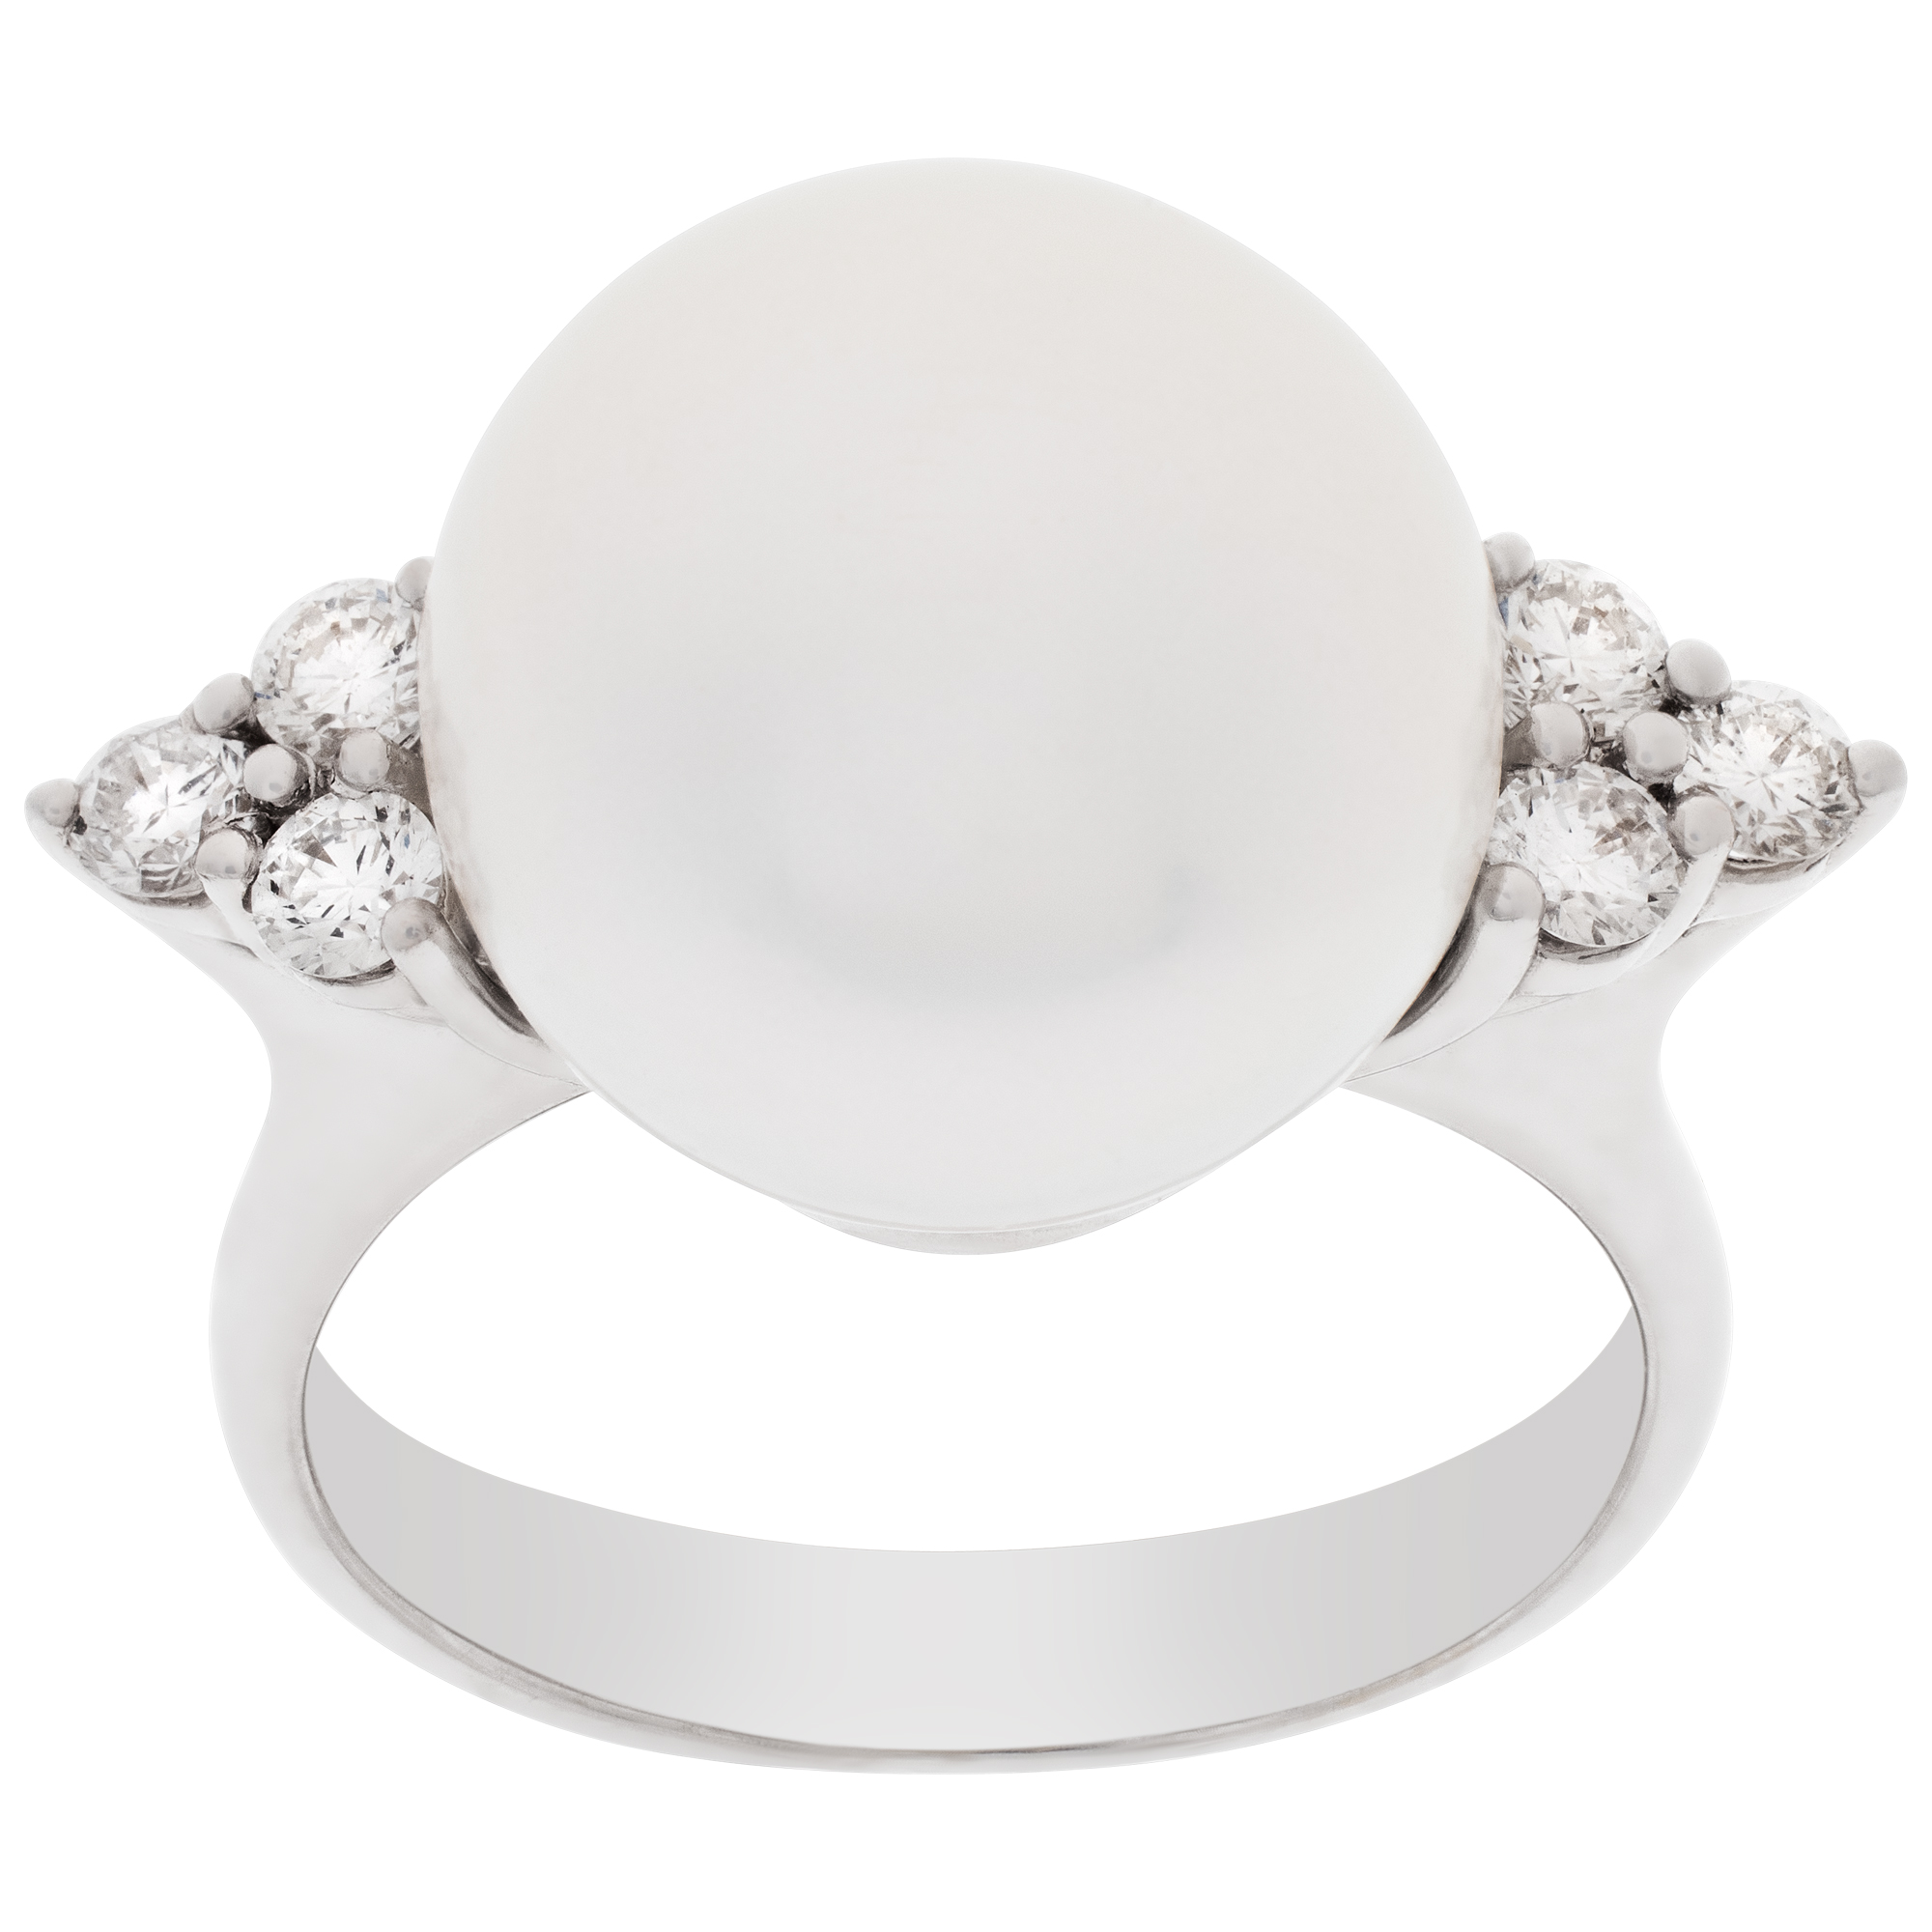 South Sea pearl & diamonds ring set in 18K white gold. Size 6.75 image 1